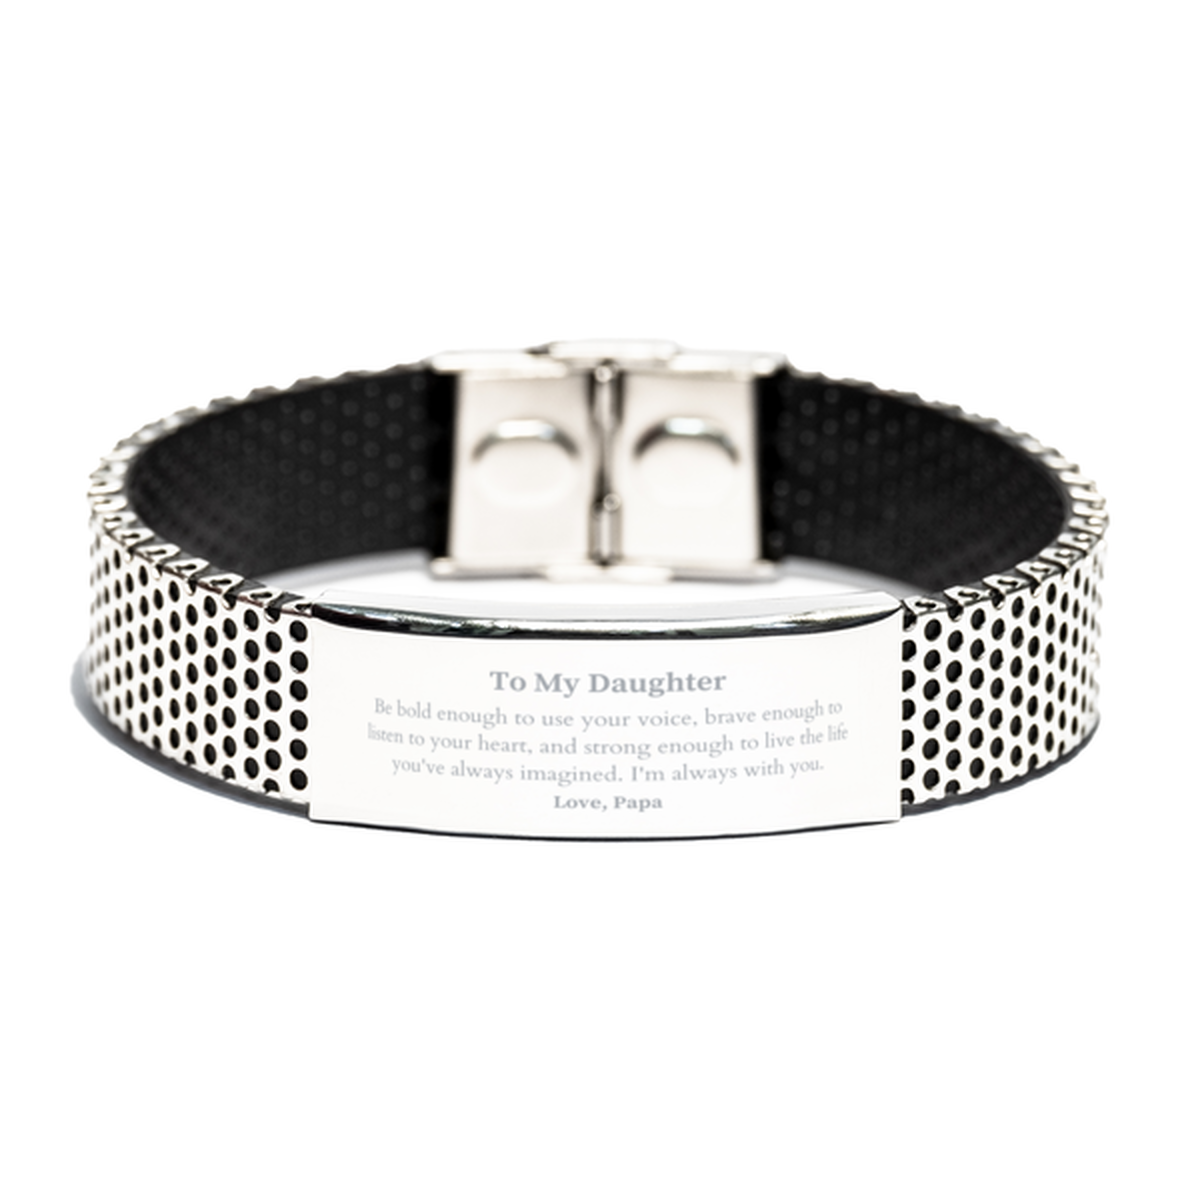 Keepsake Daughter Stainless Steel Bracelet Gift Idea Graduation Christmas Birthday Daughter from Papa, Daughter Be bold enough to use your voice, brave enough to listen to your heart. Love, Papa